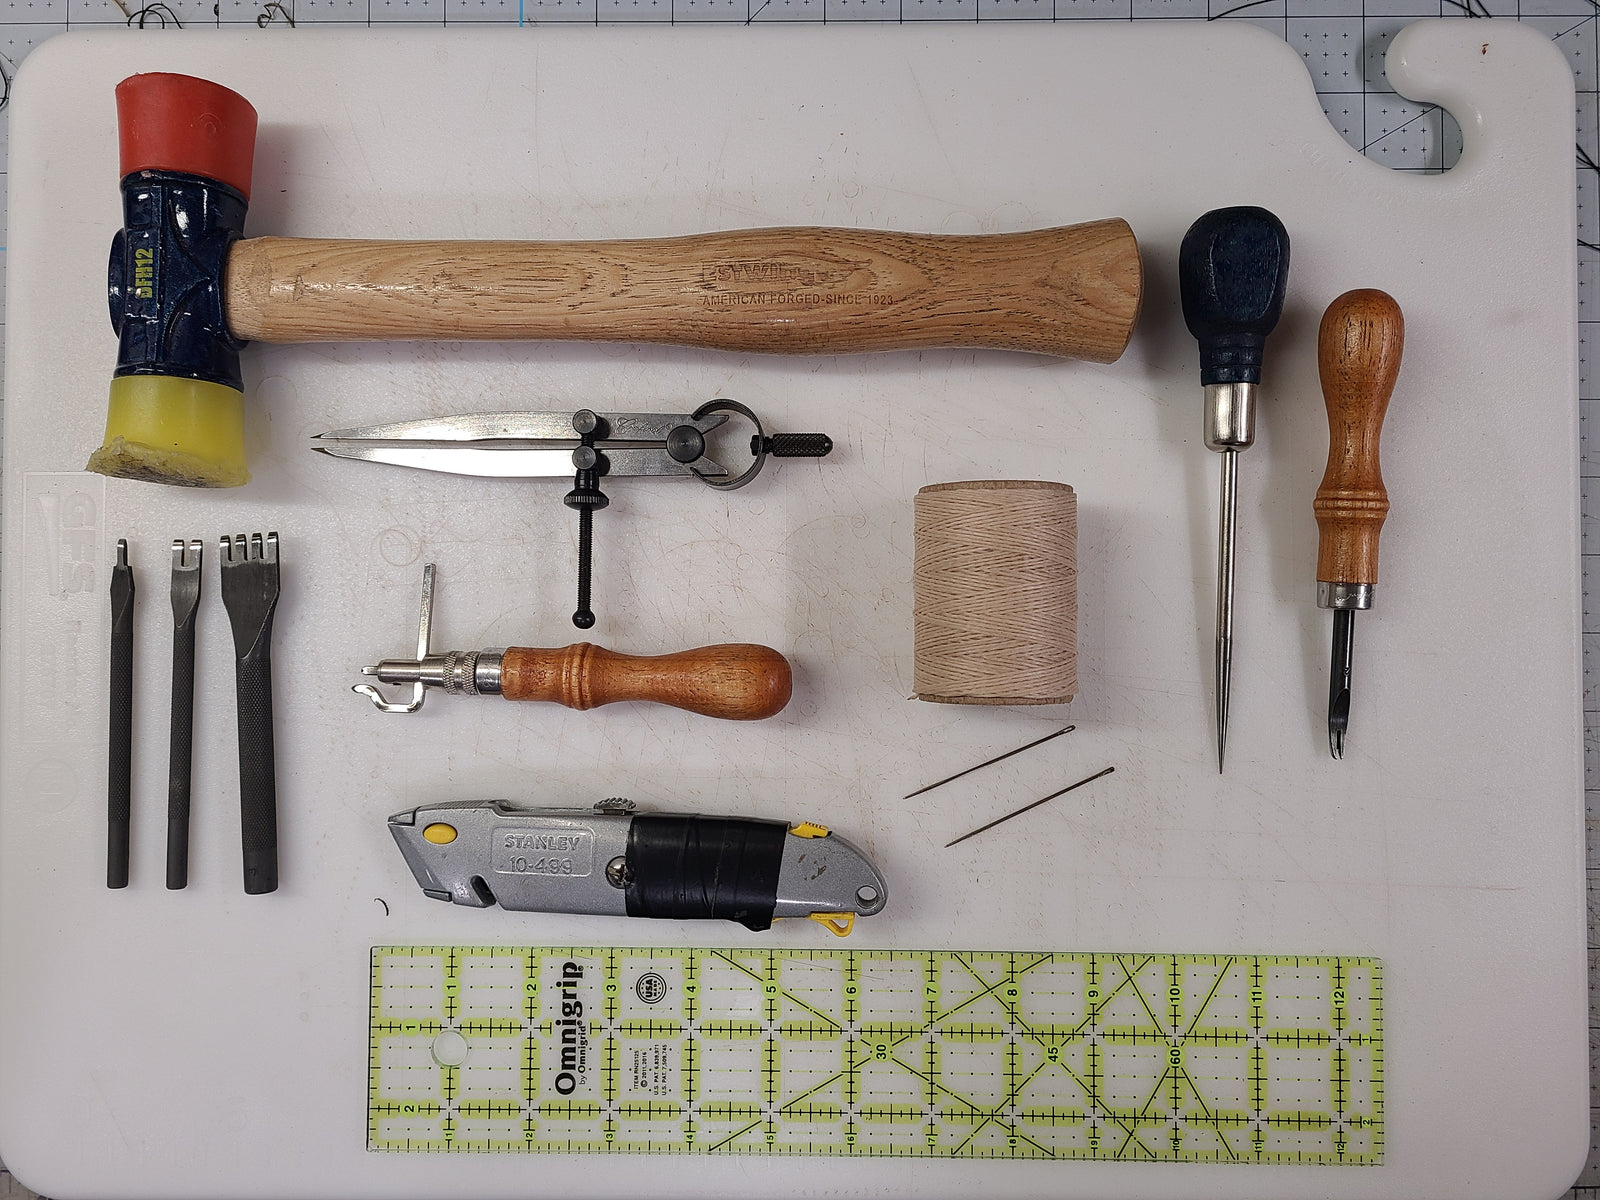 One-Pager List: Tools Needed for Leathercraft